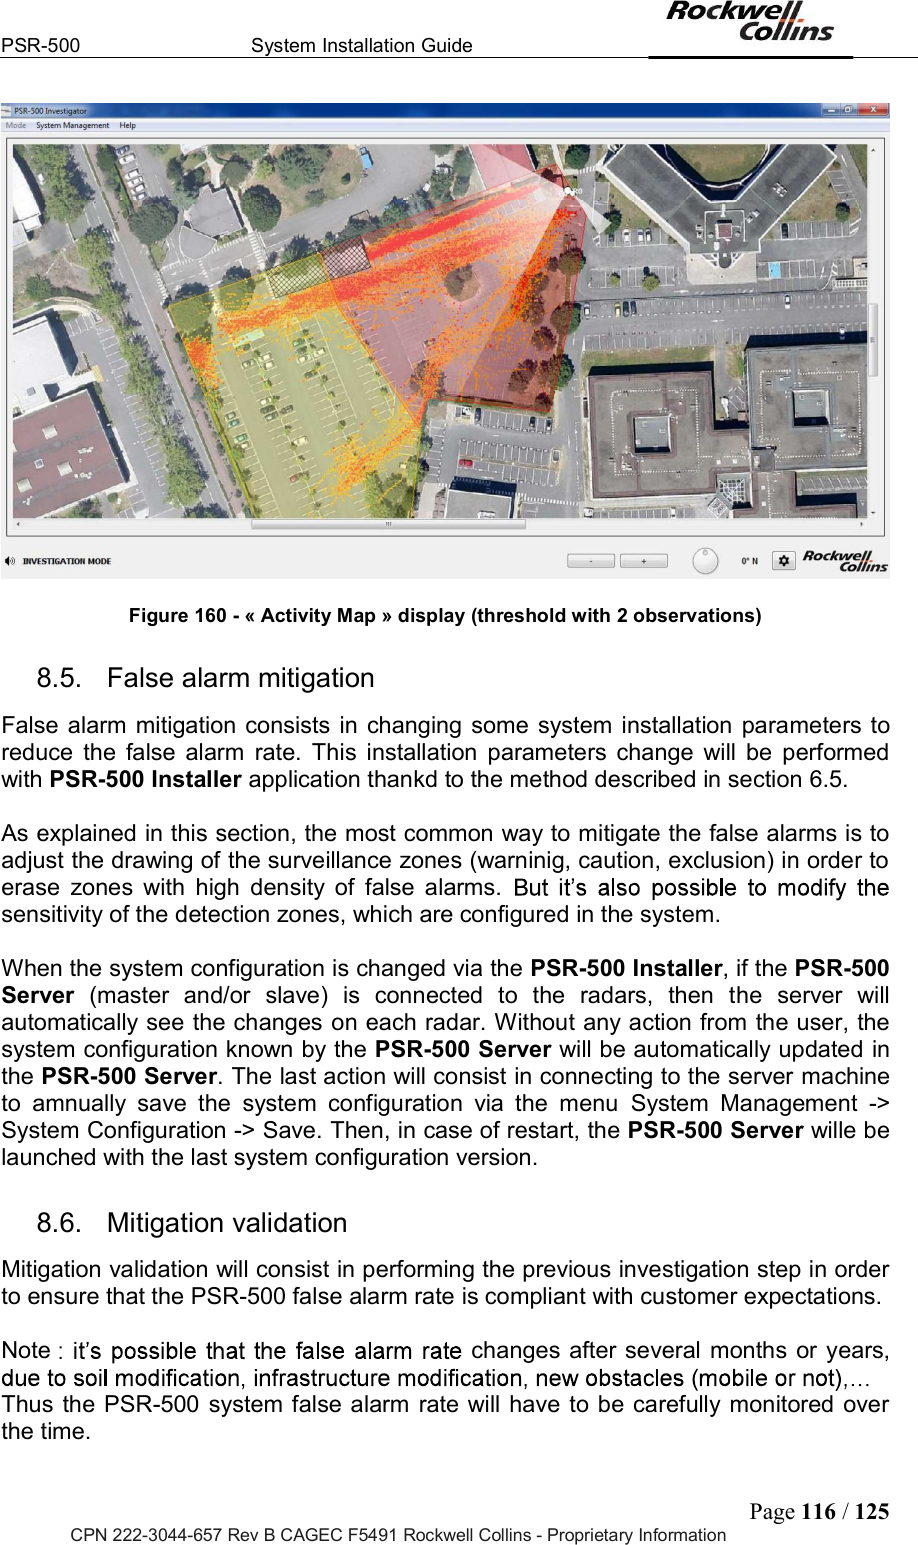 PSR-500  System Installation Guide  Page 116 / 125 CPN 222-3044-657 Rev B CAGEC F5491 Rockwell Collins - Proprietary Information   Figure 160 - « Activity Map » display (threshold with 2 observations) 8.5.  False alarm mitigation False alarm mitigation consists in changing some system installation parameters to reduce  the  false  alarm  rate.  This  installation  parameters  change will  be  performed with PSR-500 Installer application thankd to the method described in section 6.5.  As explained in this section, the most common way to mitigate the false alarms is to adjust the drawing of the surveillance zones (warninig, caution, exclusion) in order to erase  zones  with  high  density  of  false  alarms. sensitivity of the detection zones, which are configured in the system.  When the system configuration is changed via the PSR-500 Installer, if the PSR-500 Server  (master  and/or  slave)  is  connected  to  the  radars,  then  the  server  will automatically see the changes on each radar. Without any action from the user, the system configuration known by the PSR-500 Server will be automatically updated in the PSR-500 Server. The last action will consist in connecting to the server machine to  amnually  save  the  system  configuration  via  the  menu  System  Management  -&gt; System Configuration -&gt; Save. Then, in case of restart, the PSR-500 Server wille be launched with the last system configuration version. 8.6.  Mitigation validation Mitigation validation will consist in performing the previous investigation step in order to ensure that the PSR-500 false alarm rate is compliant with customer expectations.  Note  changes after several months or years,  Thus the PSR-500 system false alarm rate will have to be carefully monitored over the time.  